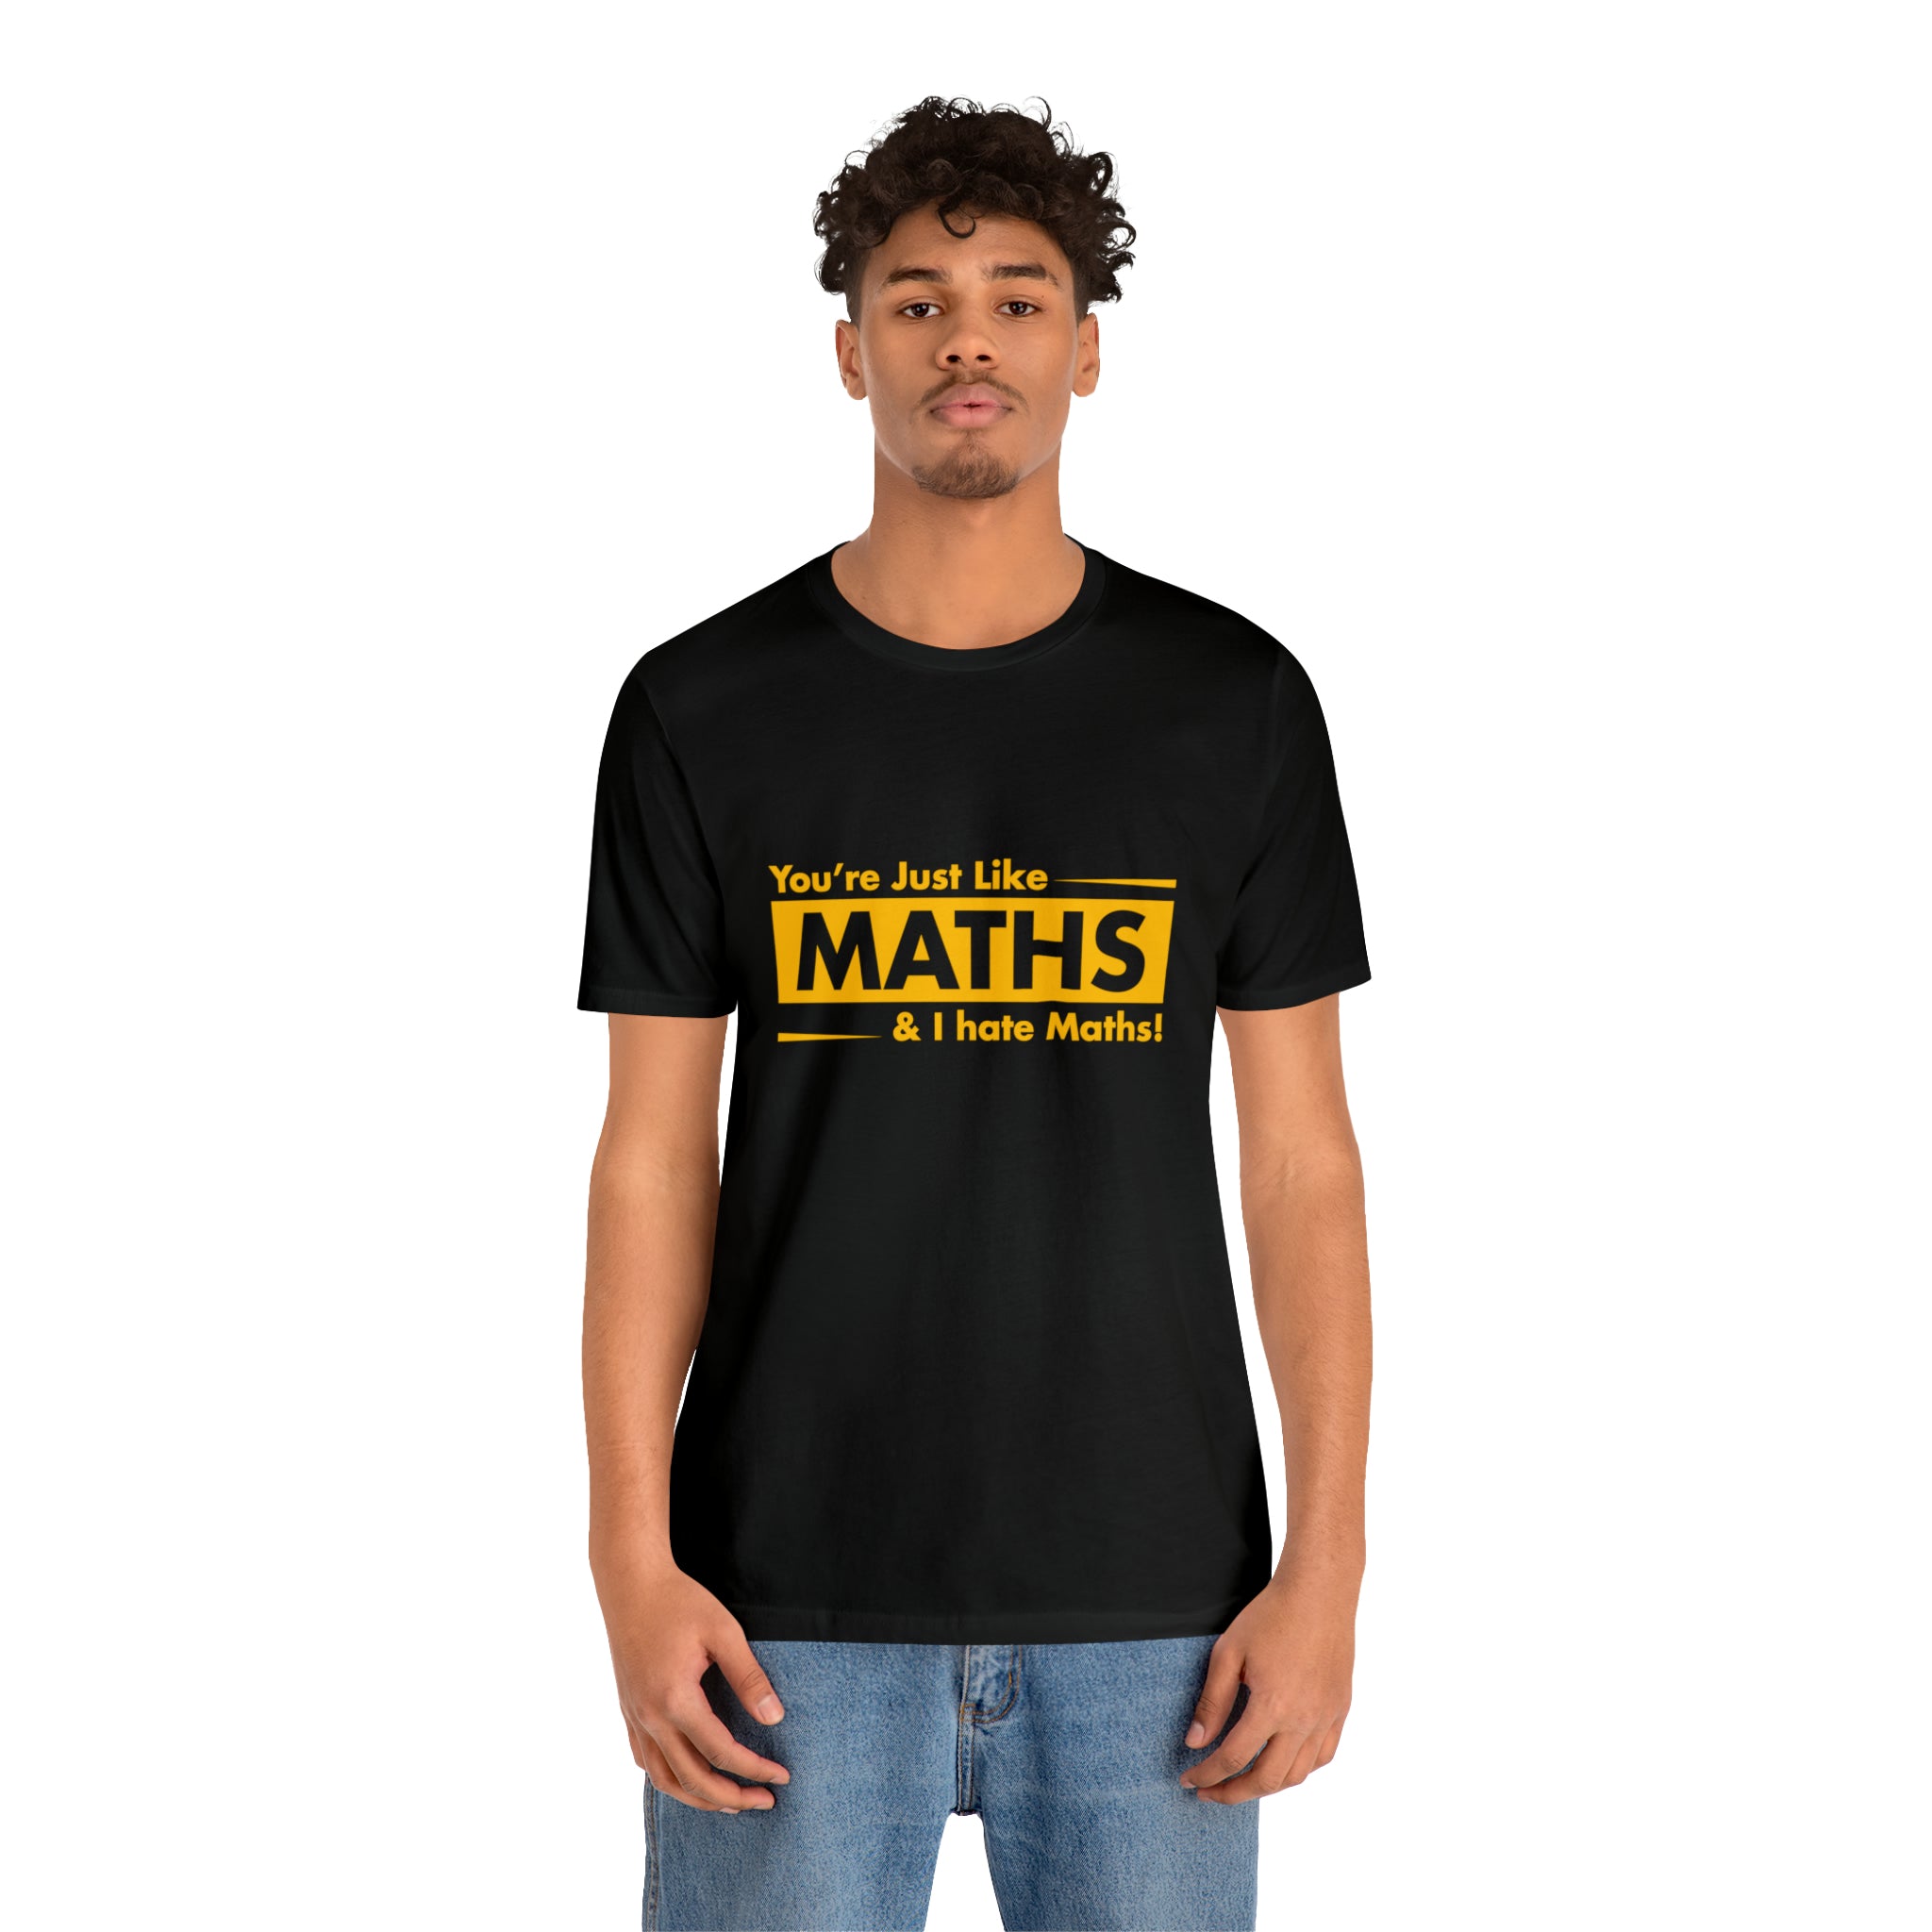 A man with a great fashion sense wears a black "You are just like maths and I hate maths" T-shirt.